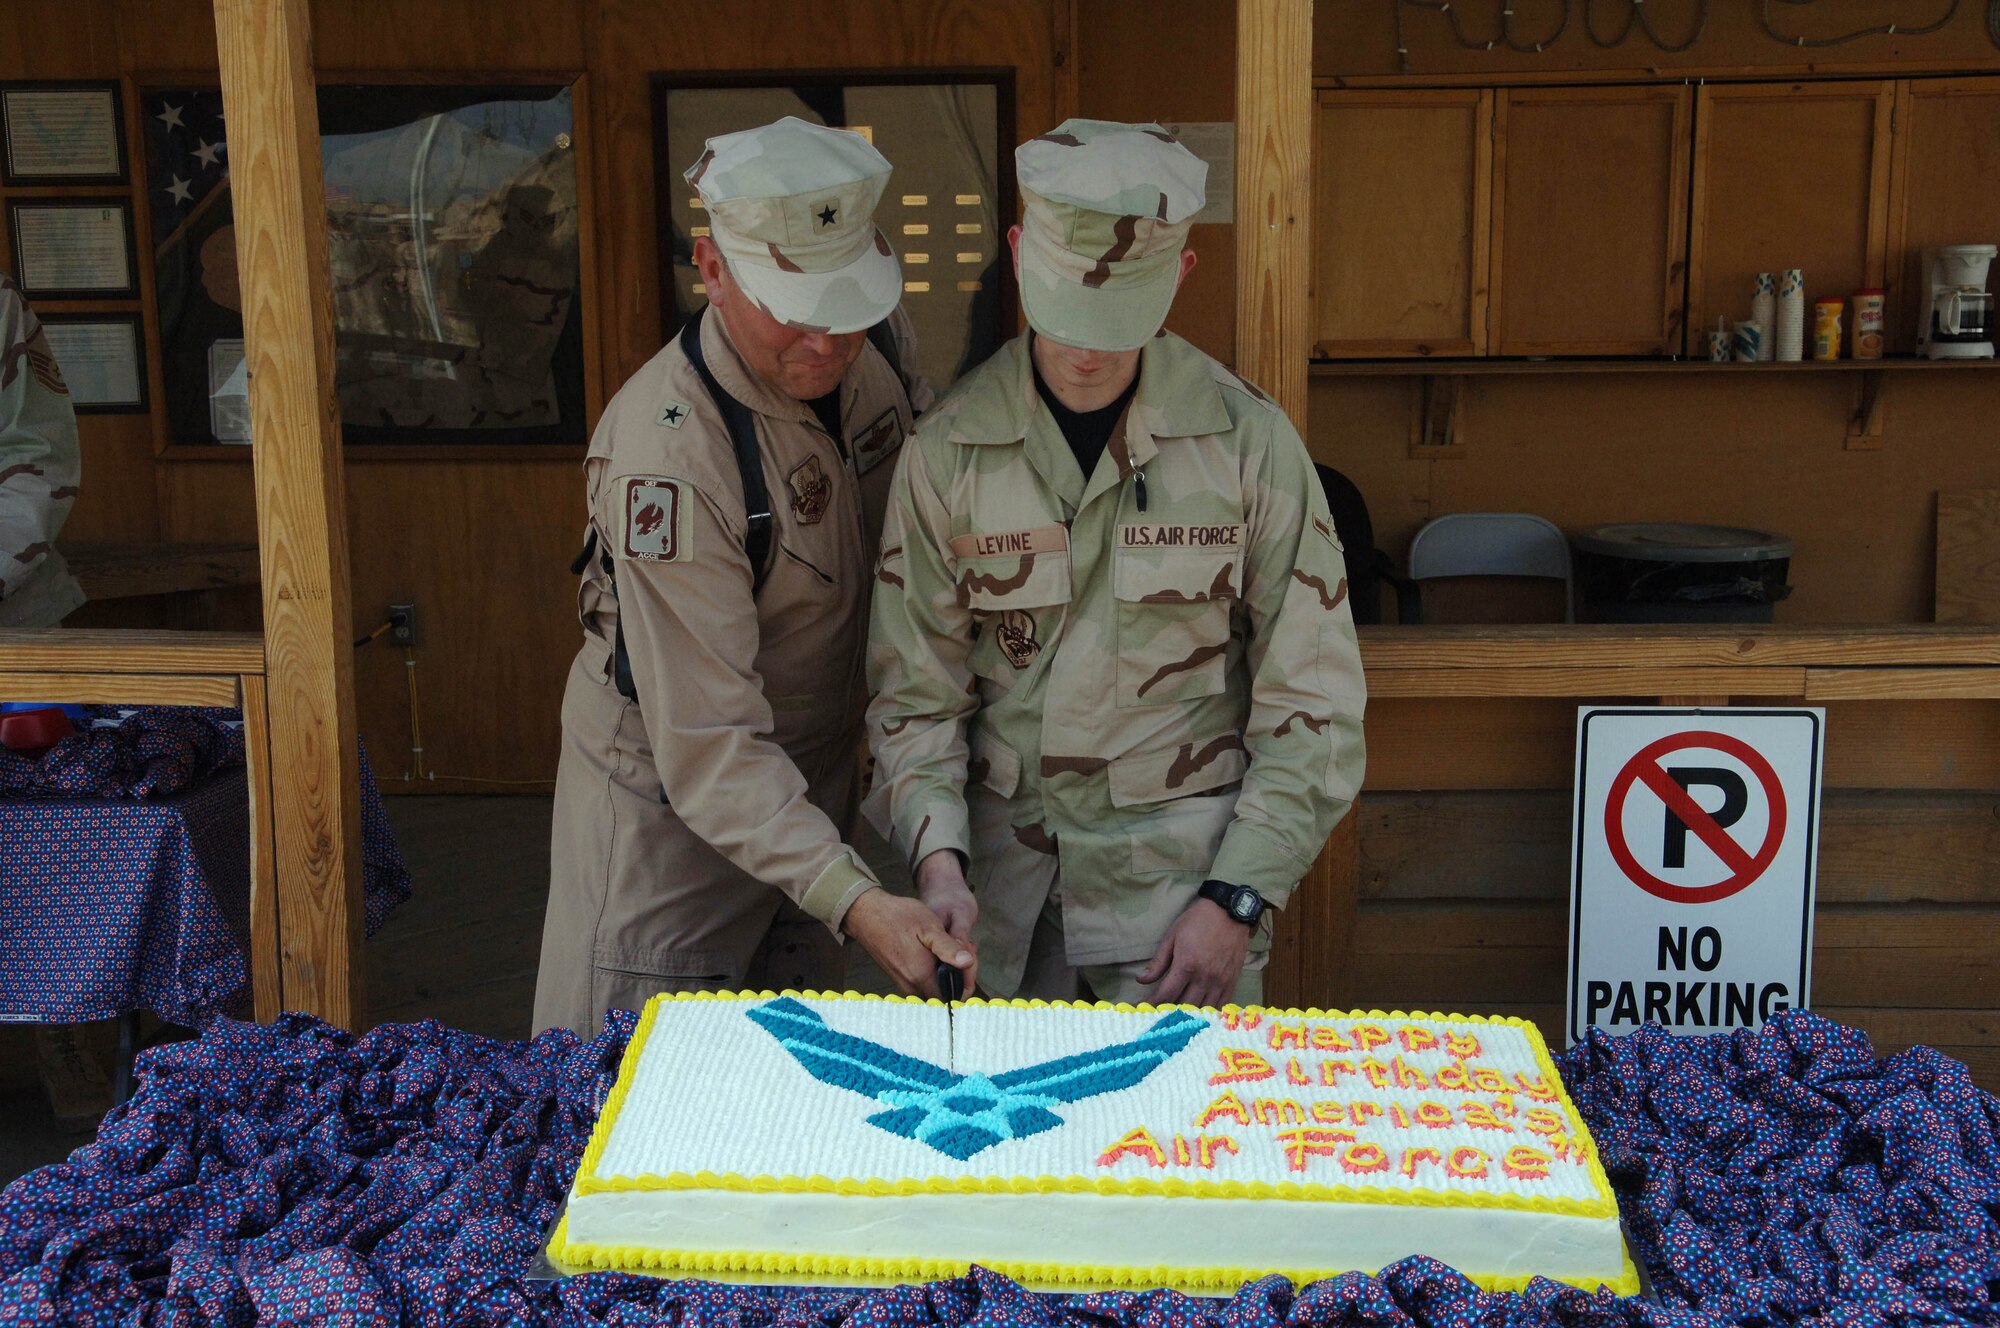 Brig. Gen. Christopher Miller, 455th Air Expeditionary Wing commander, and Airman Nicholas Levine, a crew chief with the 455th Expeditionary Maintenance Squadron, cut the annual Air Force birthday cake.  Tradition states the cake be cut by the most senior officer and the youngest airman. (U.S. Air Force photo/Tech. Sgt. Joseph Kapinos)